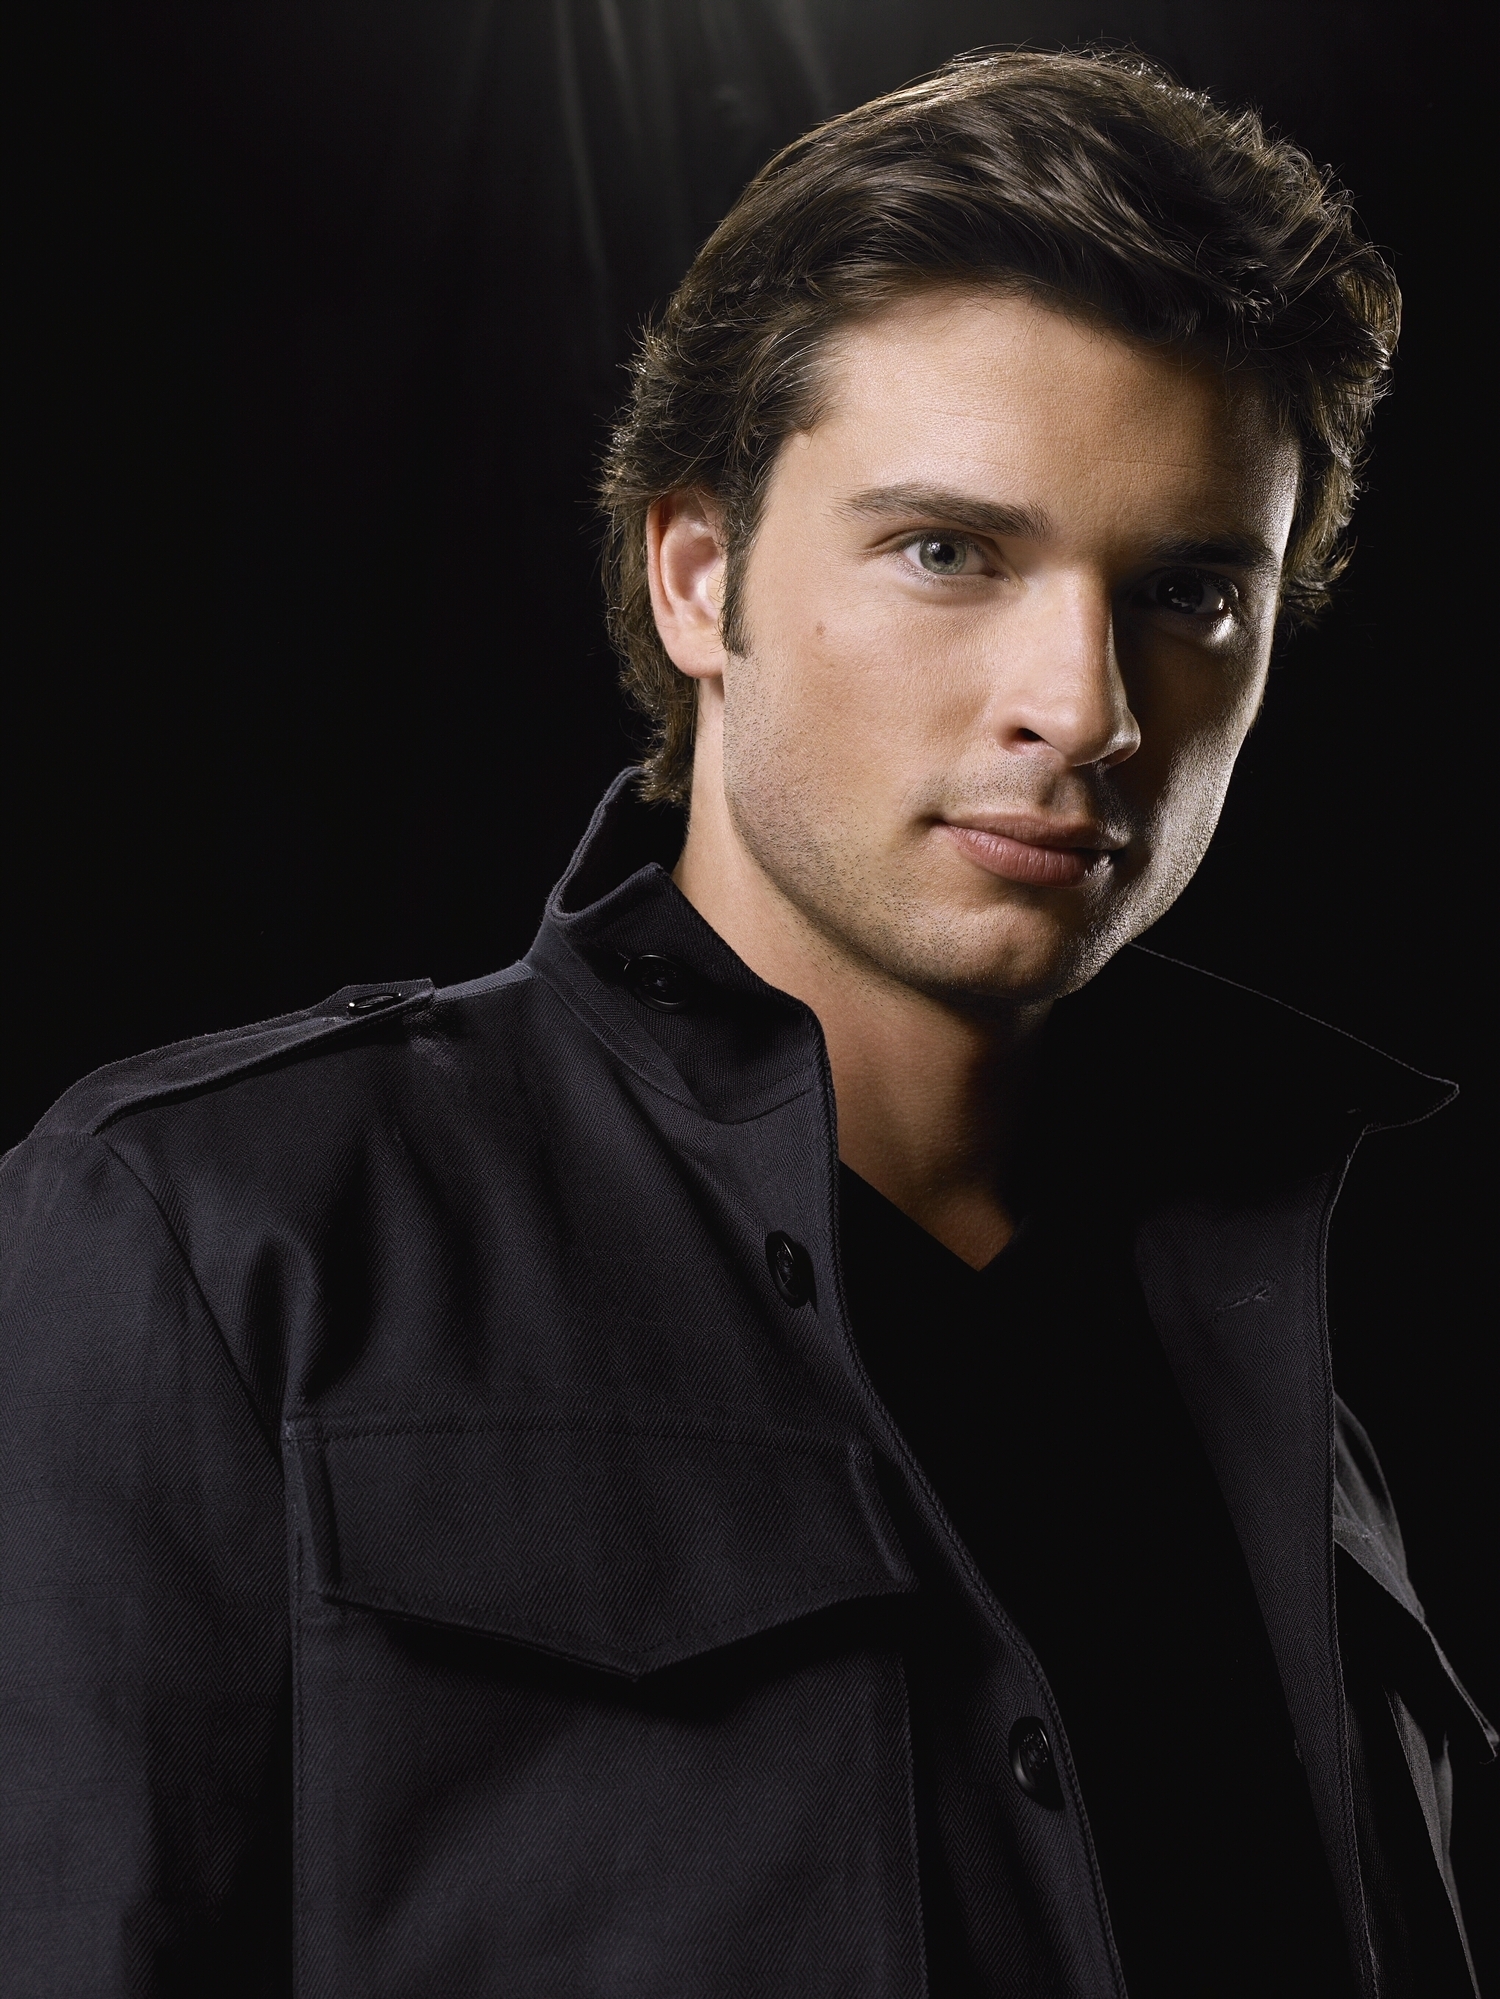 Tom Welling - Picture